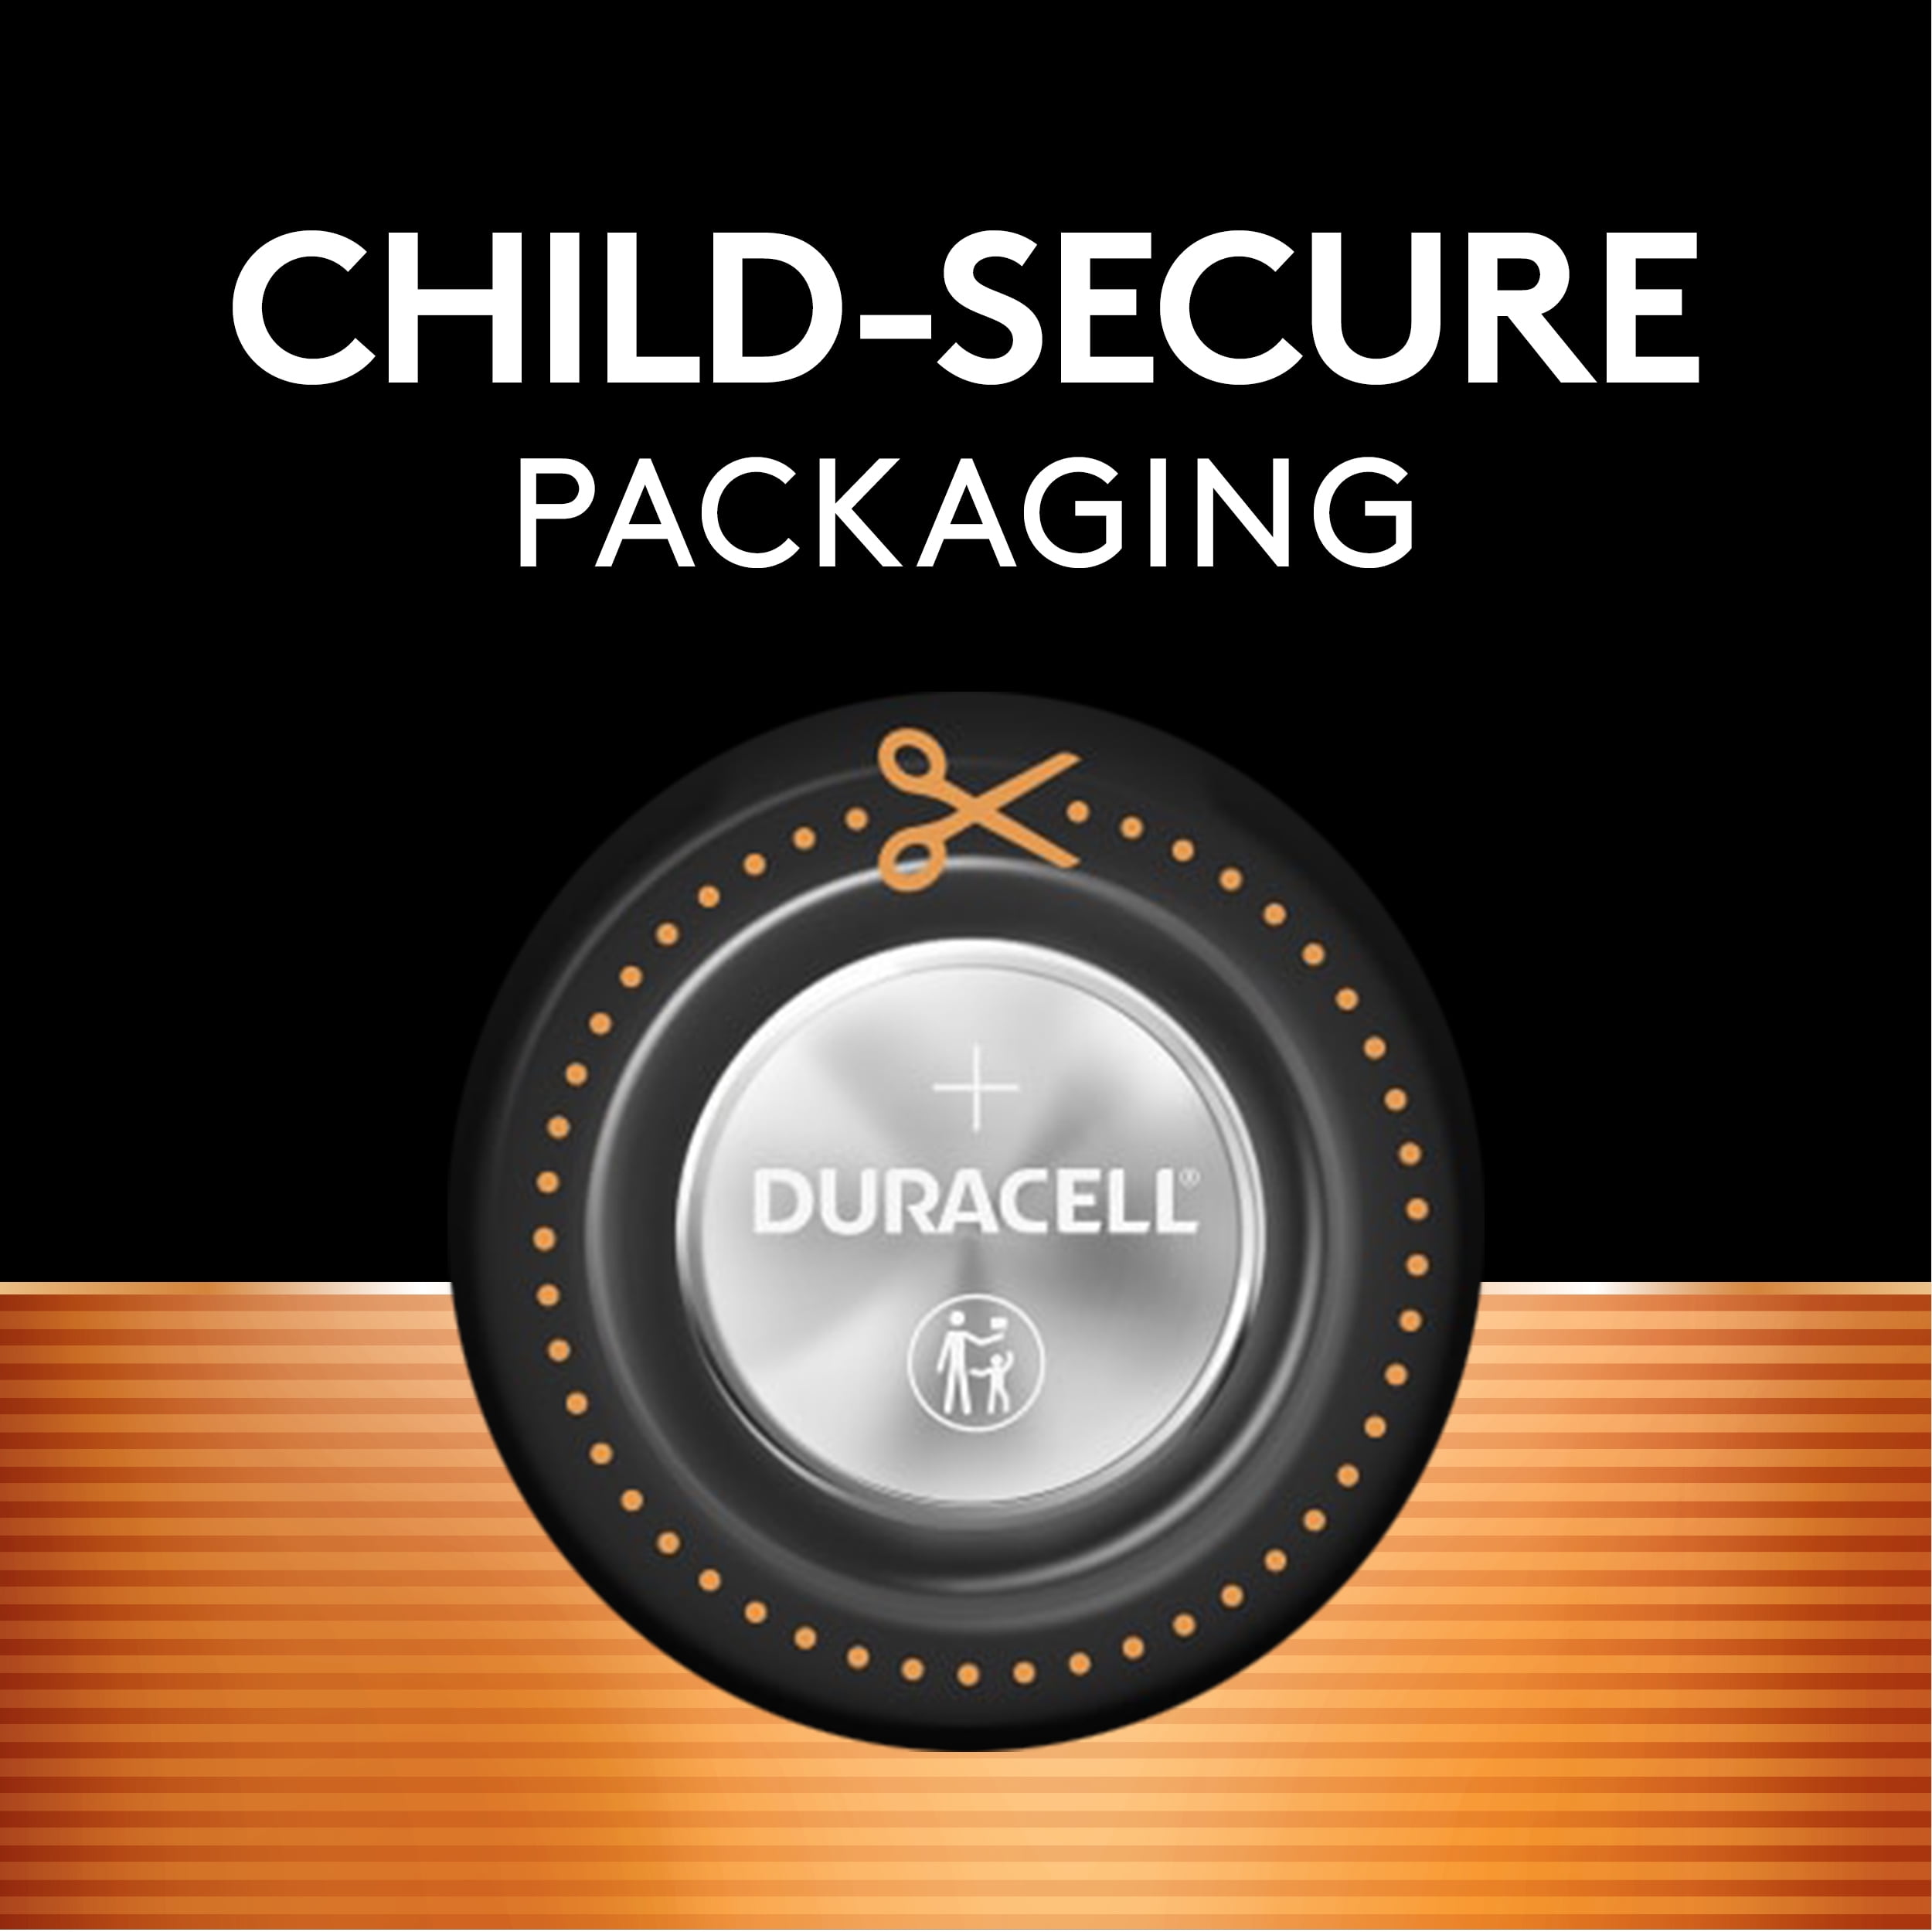 Duracell Procell CR2032 Intense Lithium Batteries 3v PX2032 5-Pack